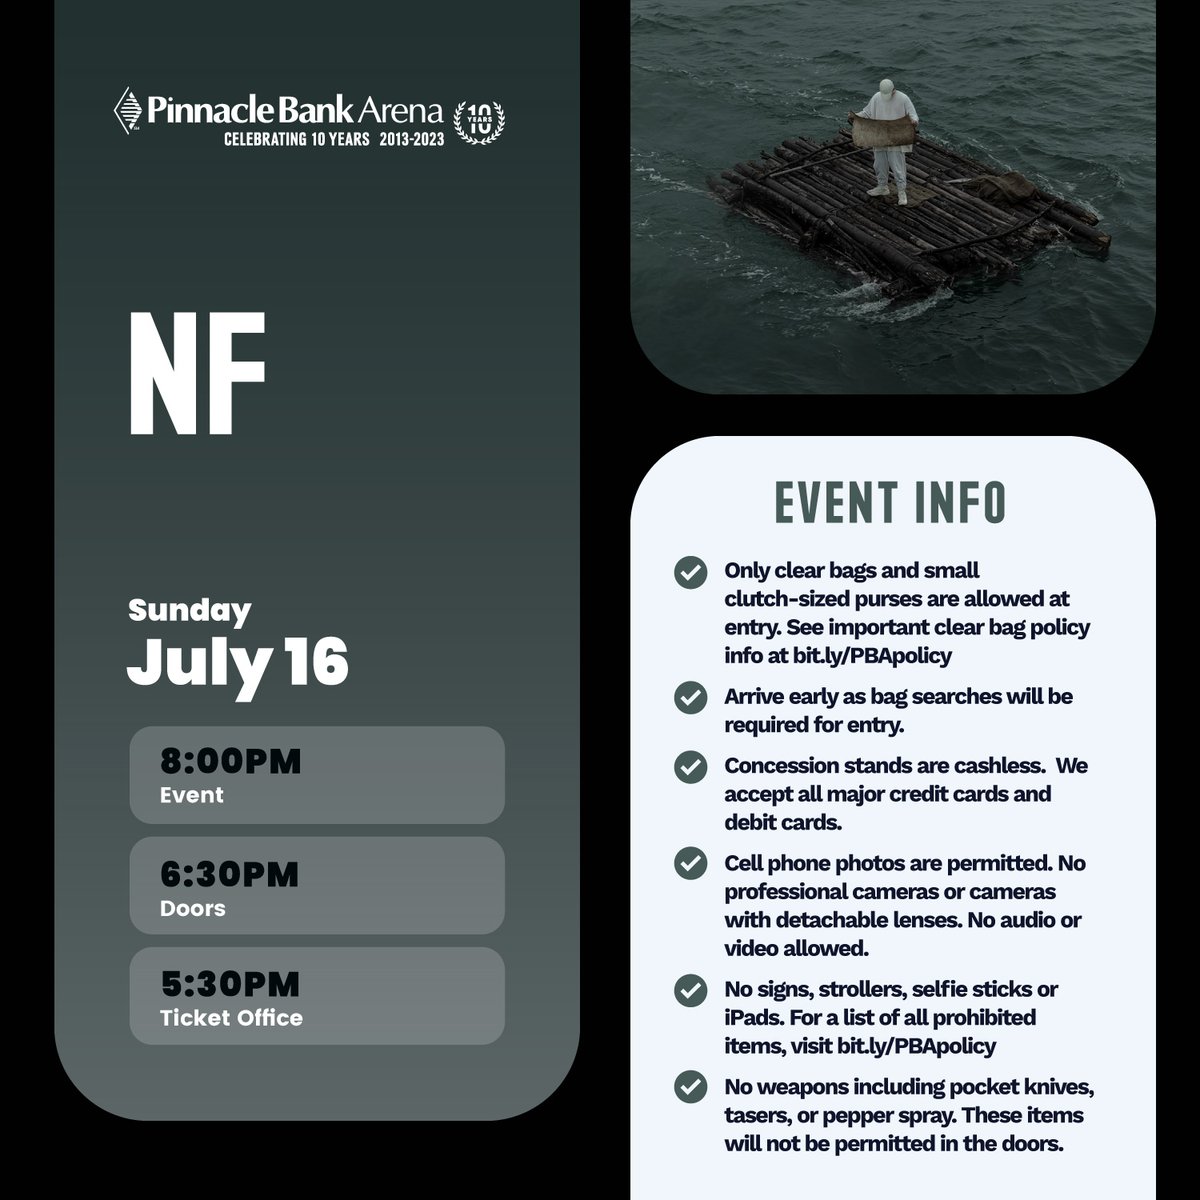 Joining us for NF? Be sure to review these important event policies.